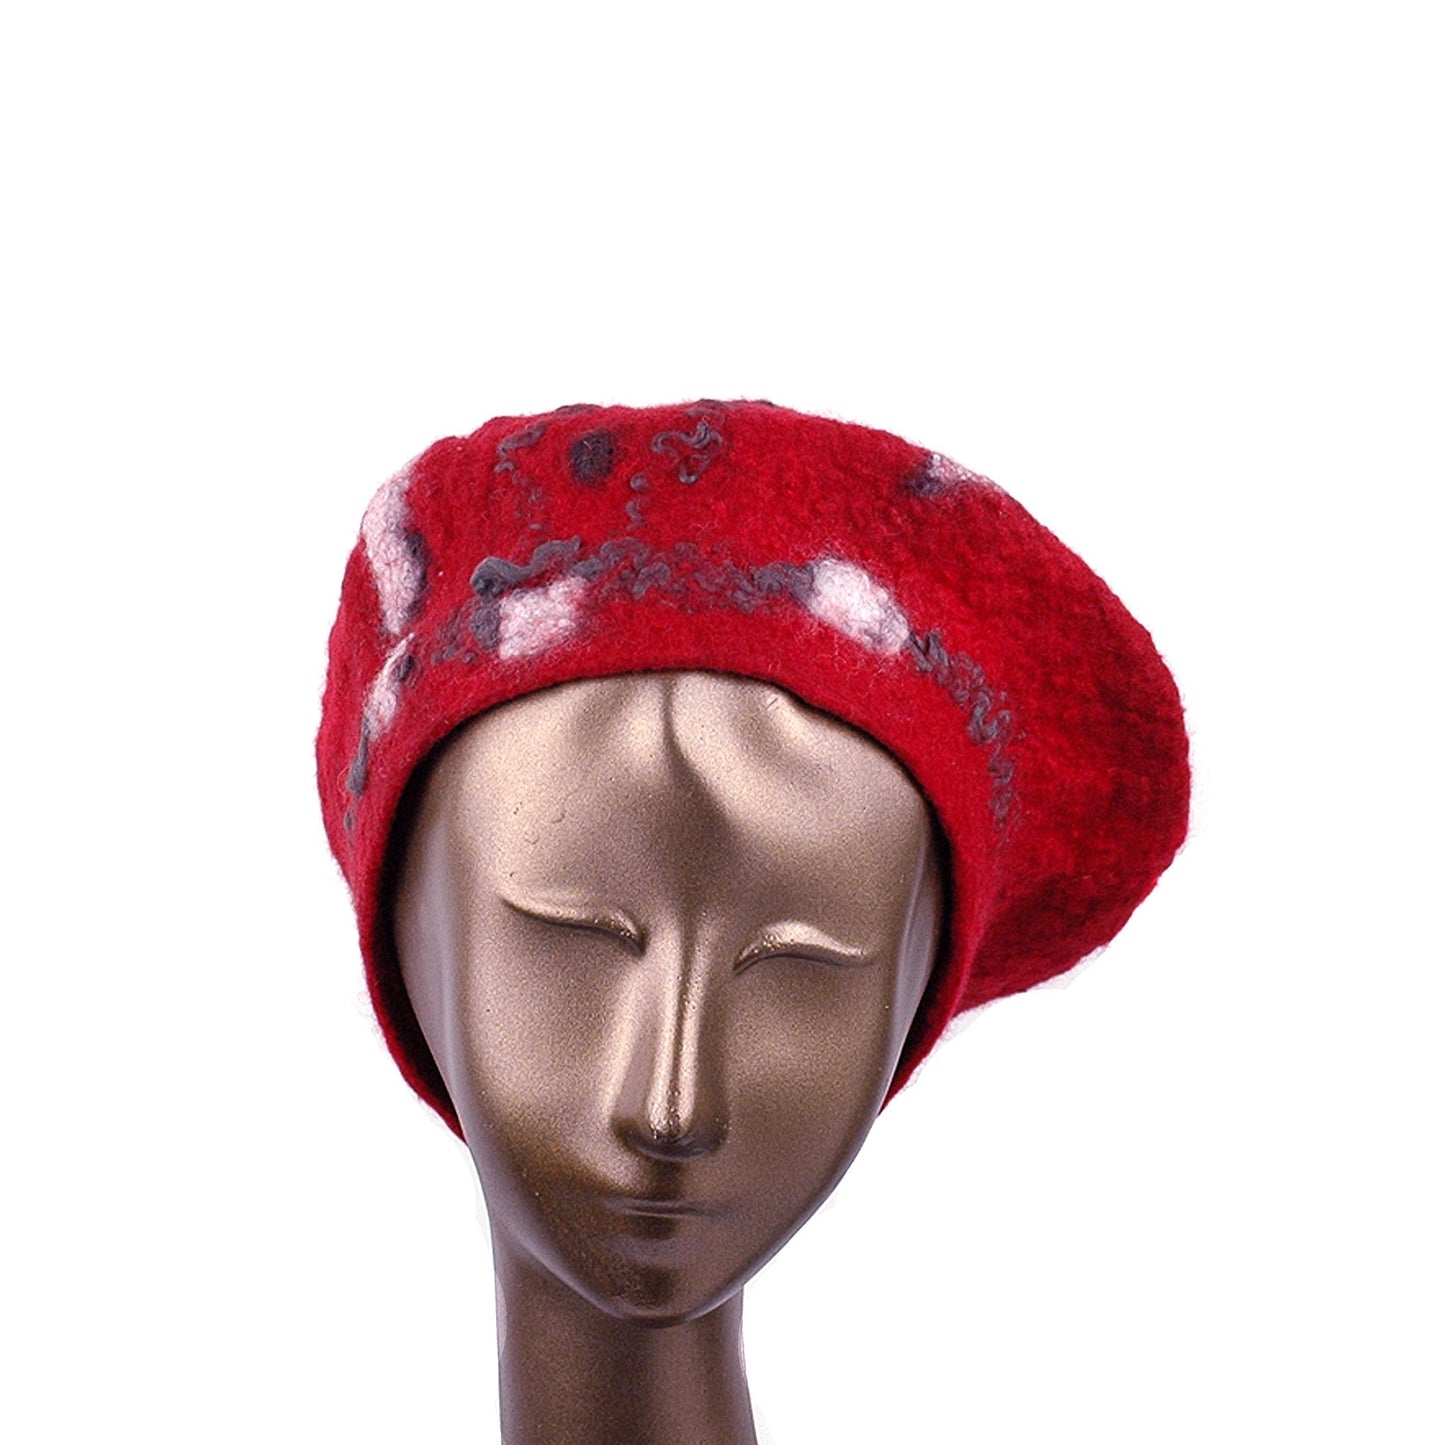 Russian Constructivist Inspired Red and Black Felted Beret - front view